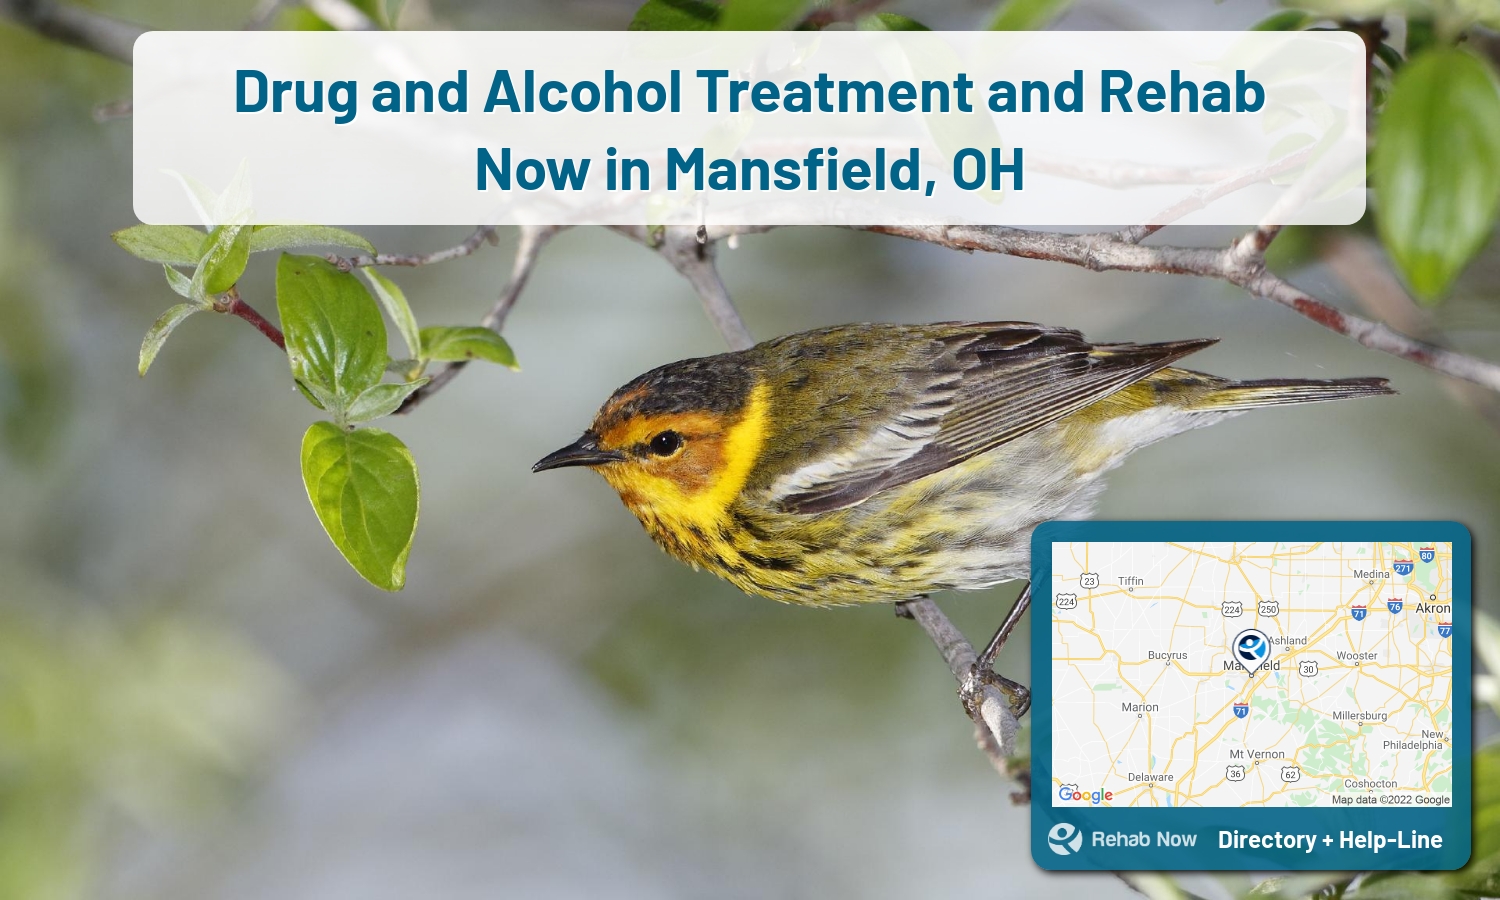 Ready to pick a rehab center in Mansfield? Get off alcohol, opiates, and other drugs, by selecting top drug rehab centers in Ohio